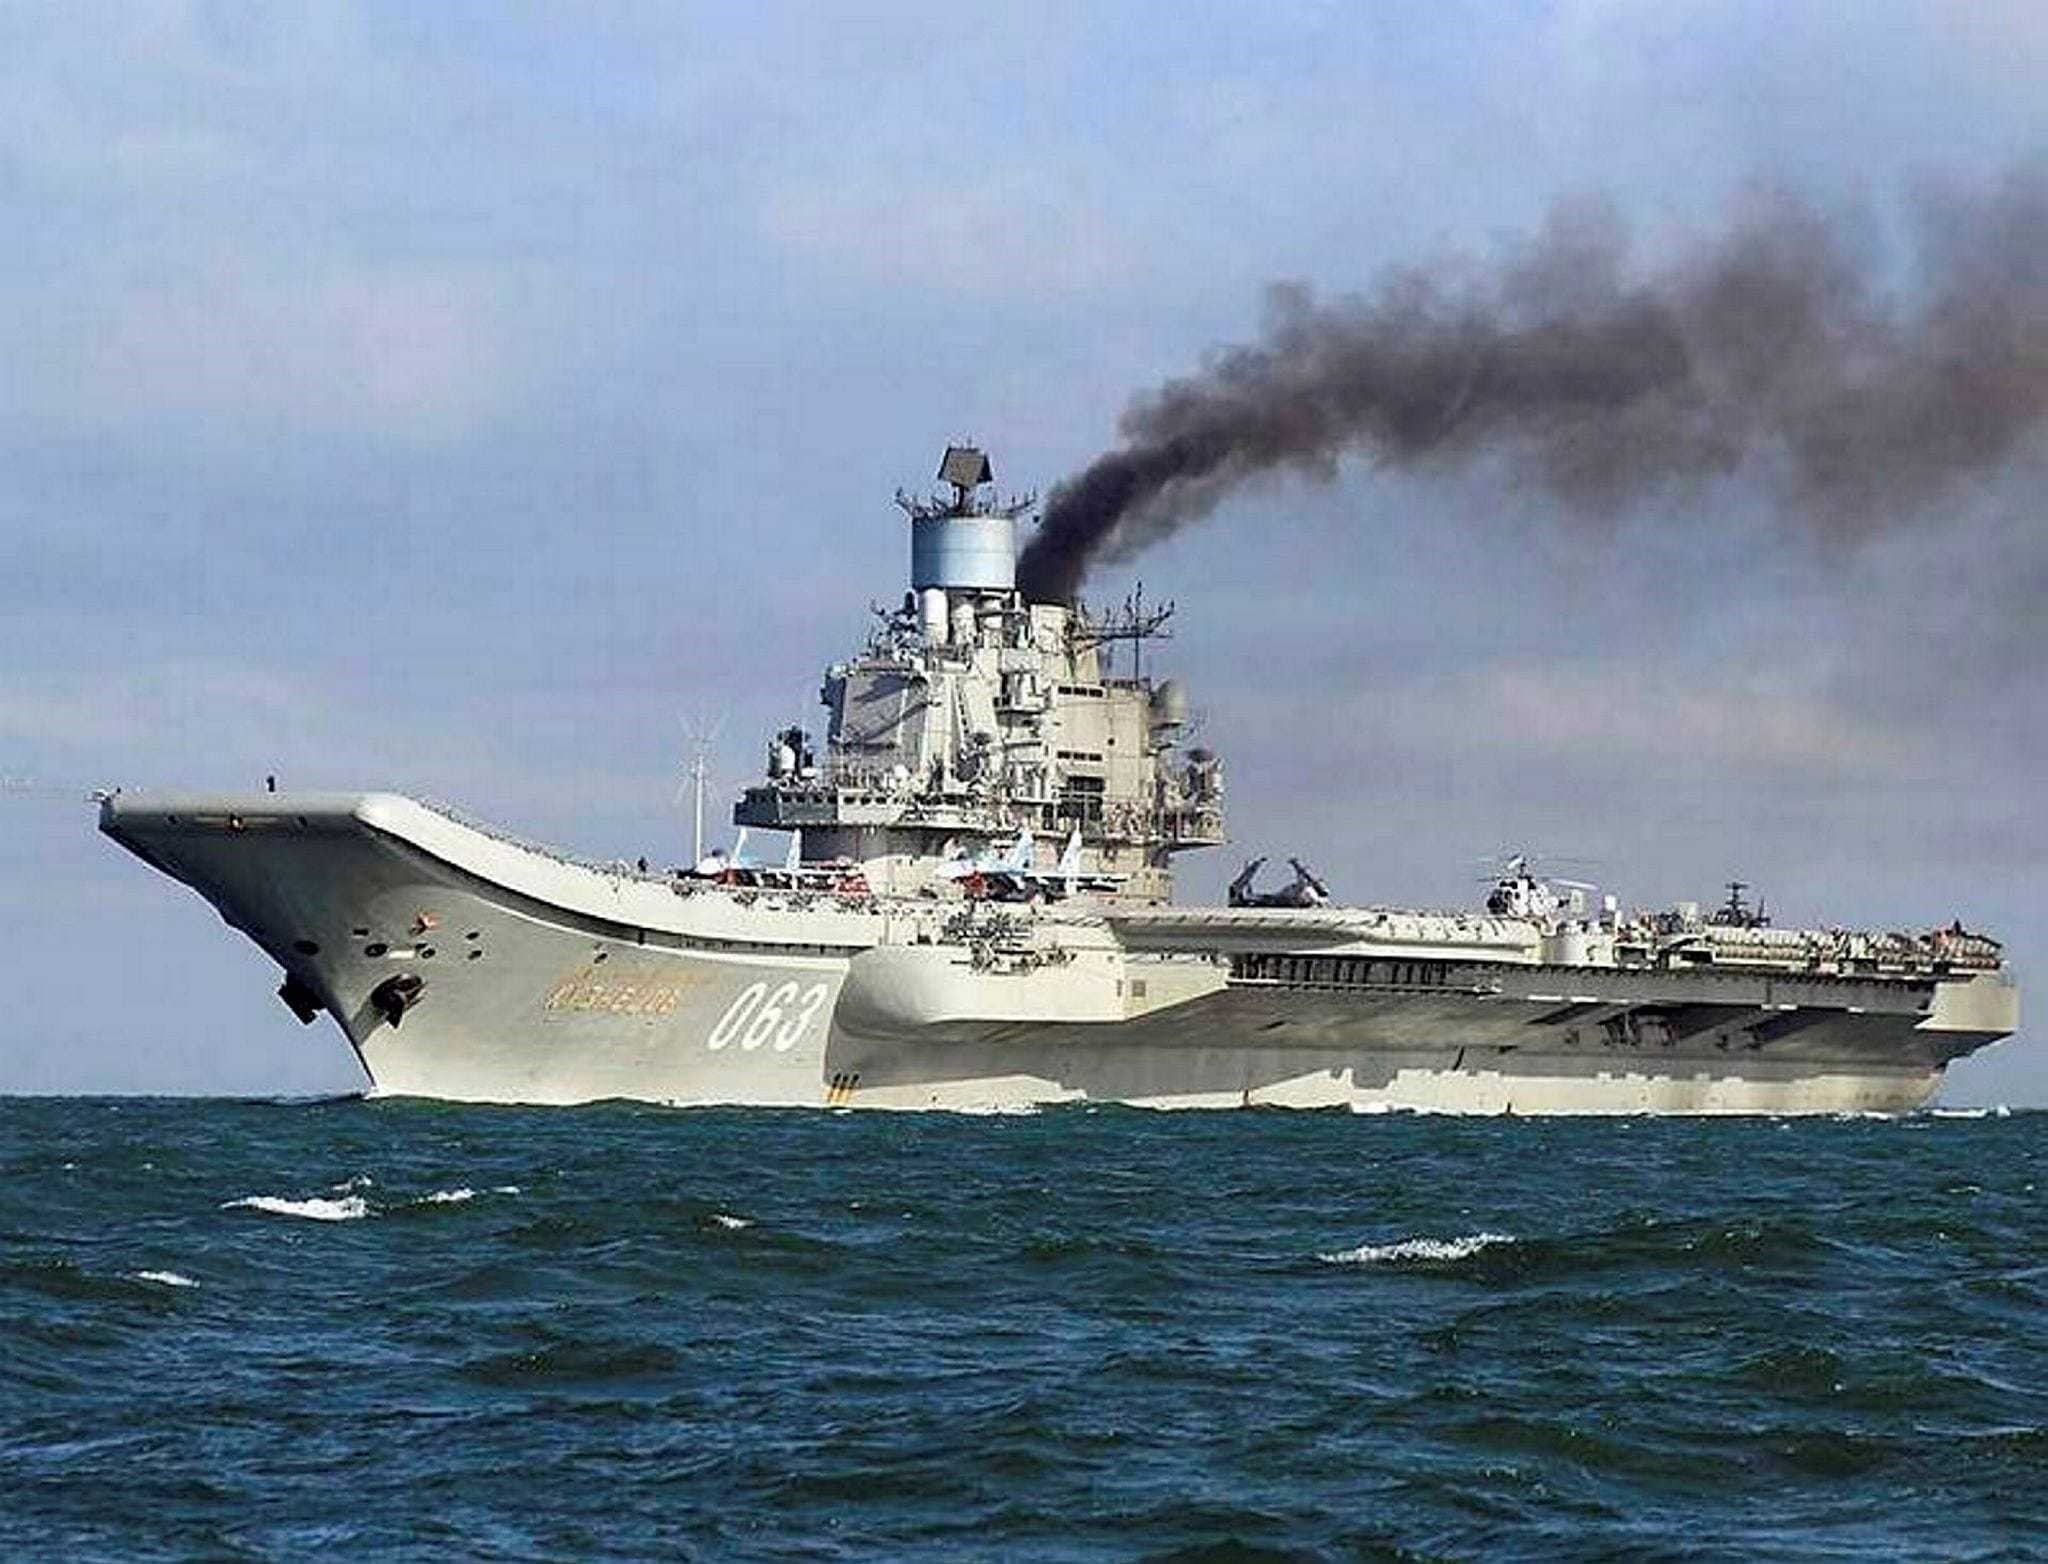 Russian aircraft carrier Admiral Kuznetsov in the English Channel on Oct. 21.